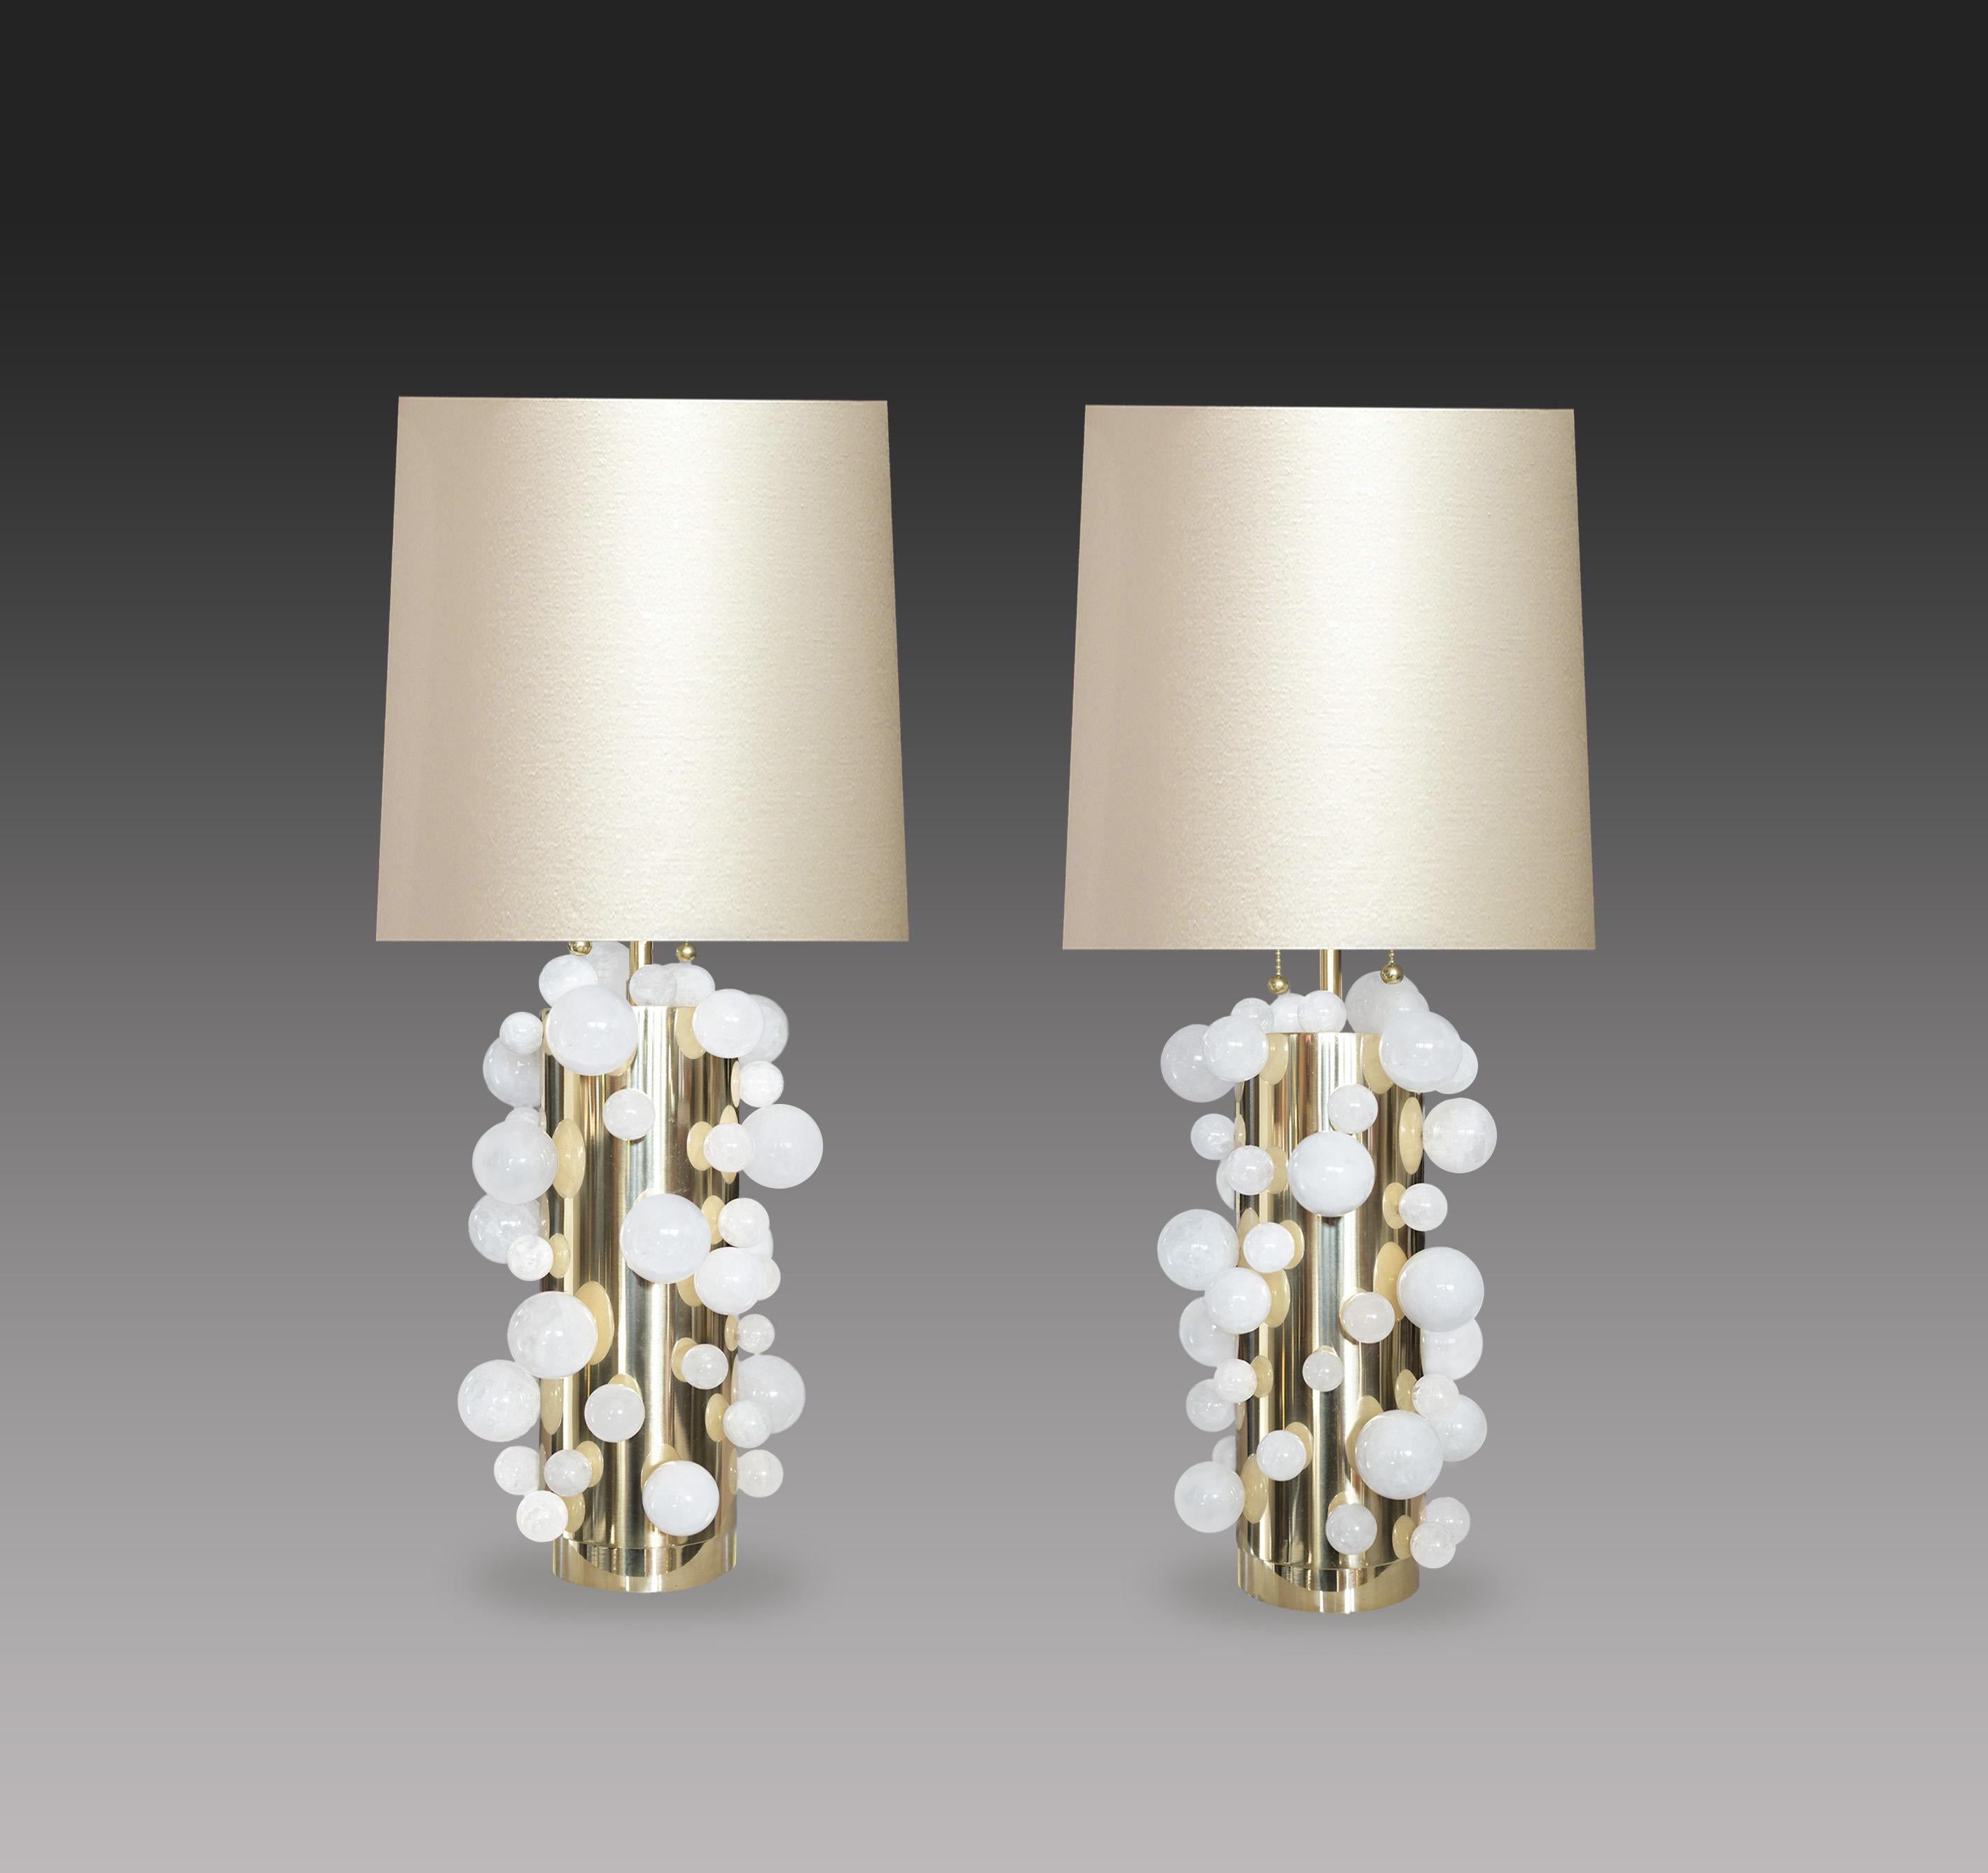 A pair of luxury white rock crystal quartz bulb lamps with polished brass bases, created by Phoenix Gallery, NYC.

(Lampshade not included).